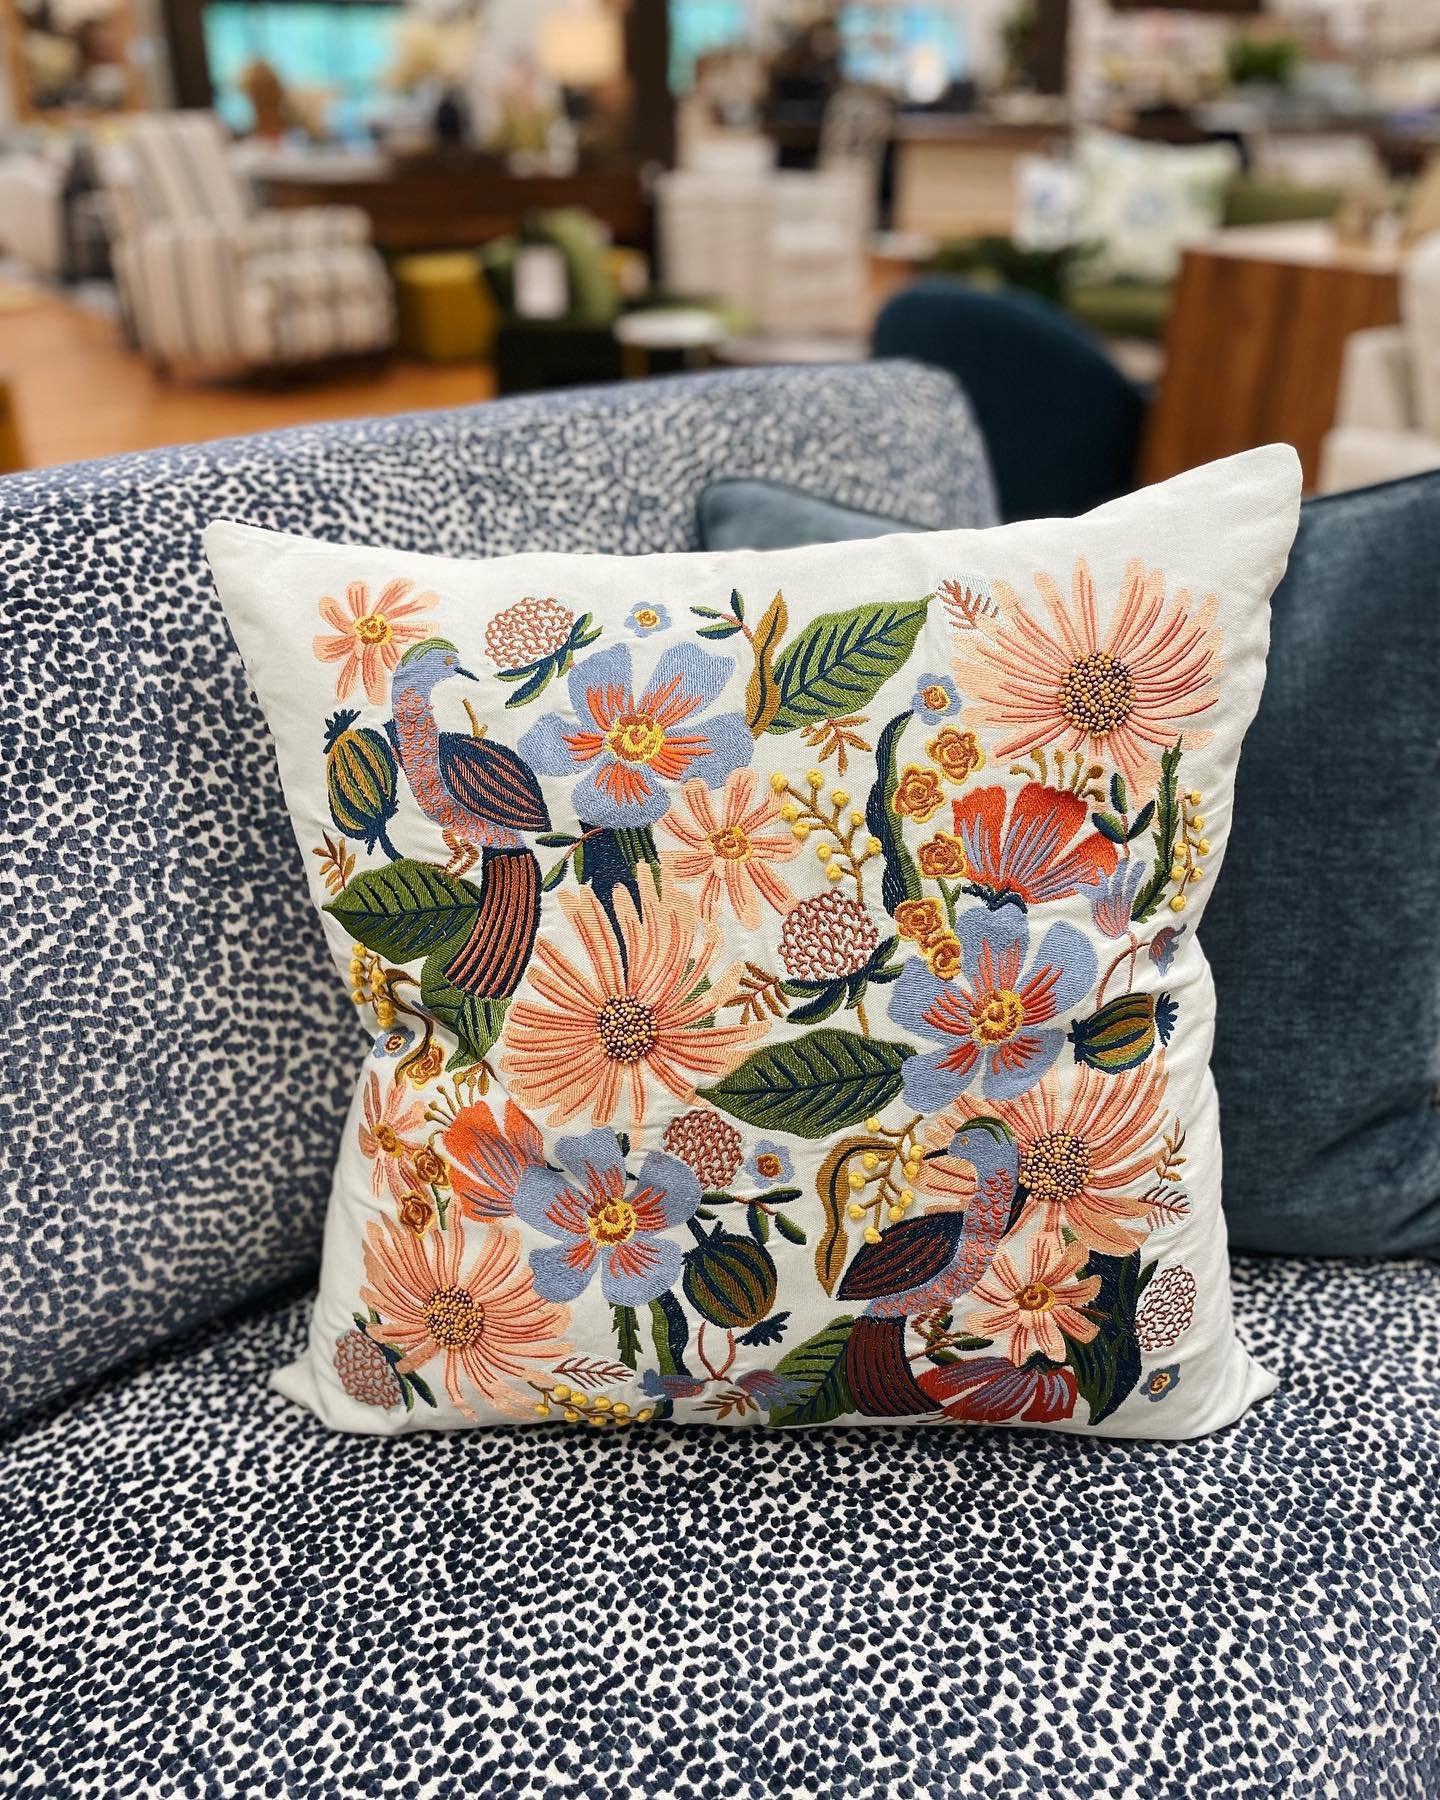 Just in: brand new @riflepaperco pillows! Which one is your favorite?